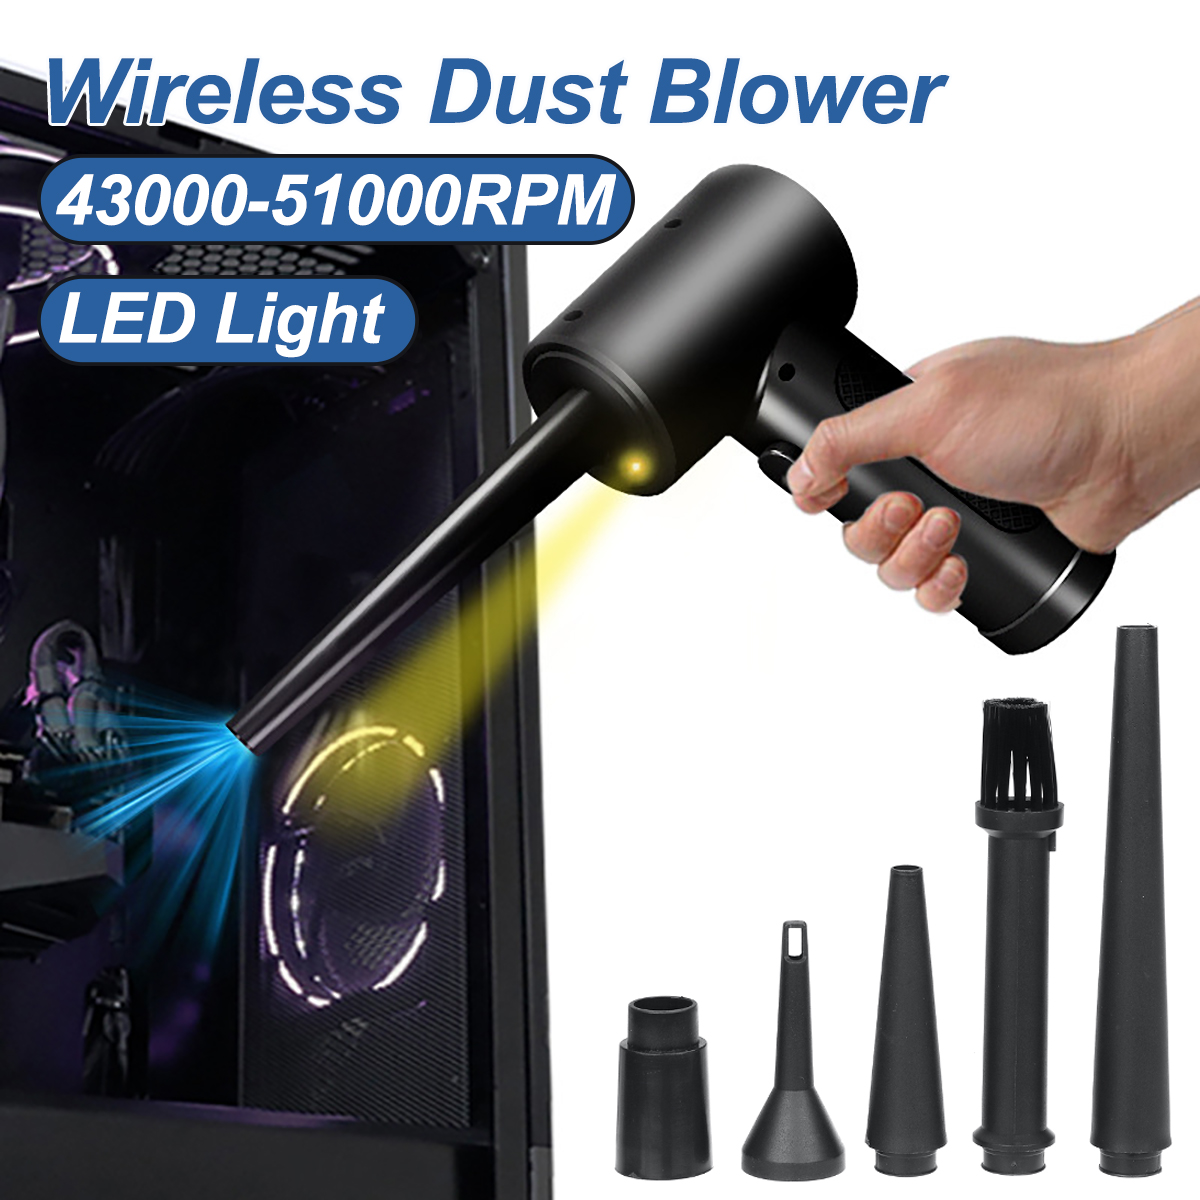 51000RPM-Cordless-Dust-Blower-Air-Inflatable-Keyboard-Vacuum-Cleaners-With-LED-Light-1957390-1